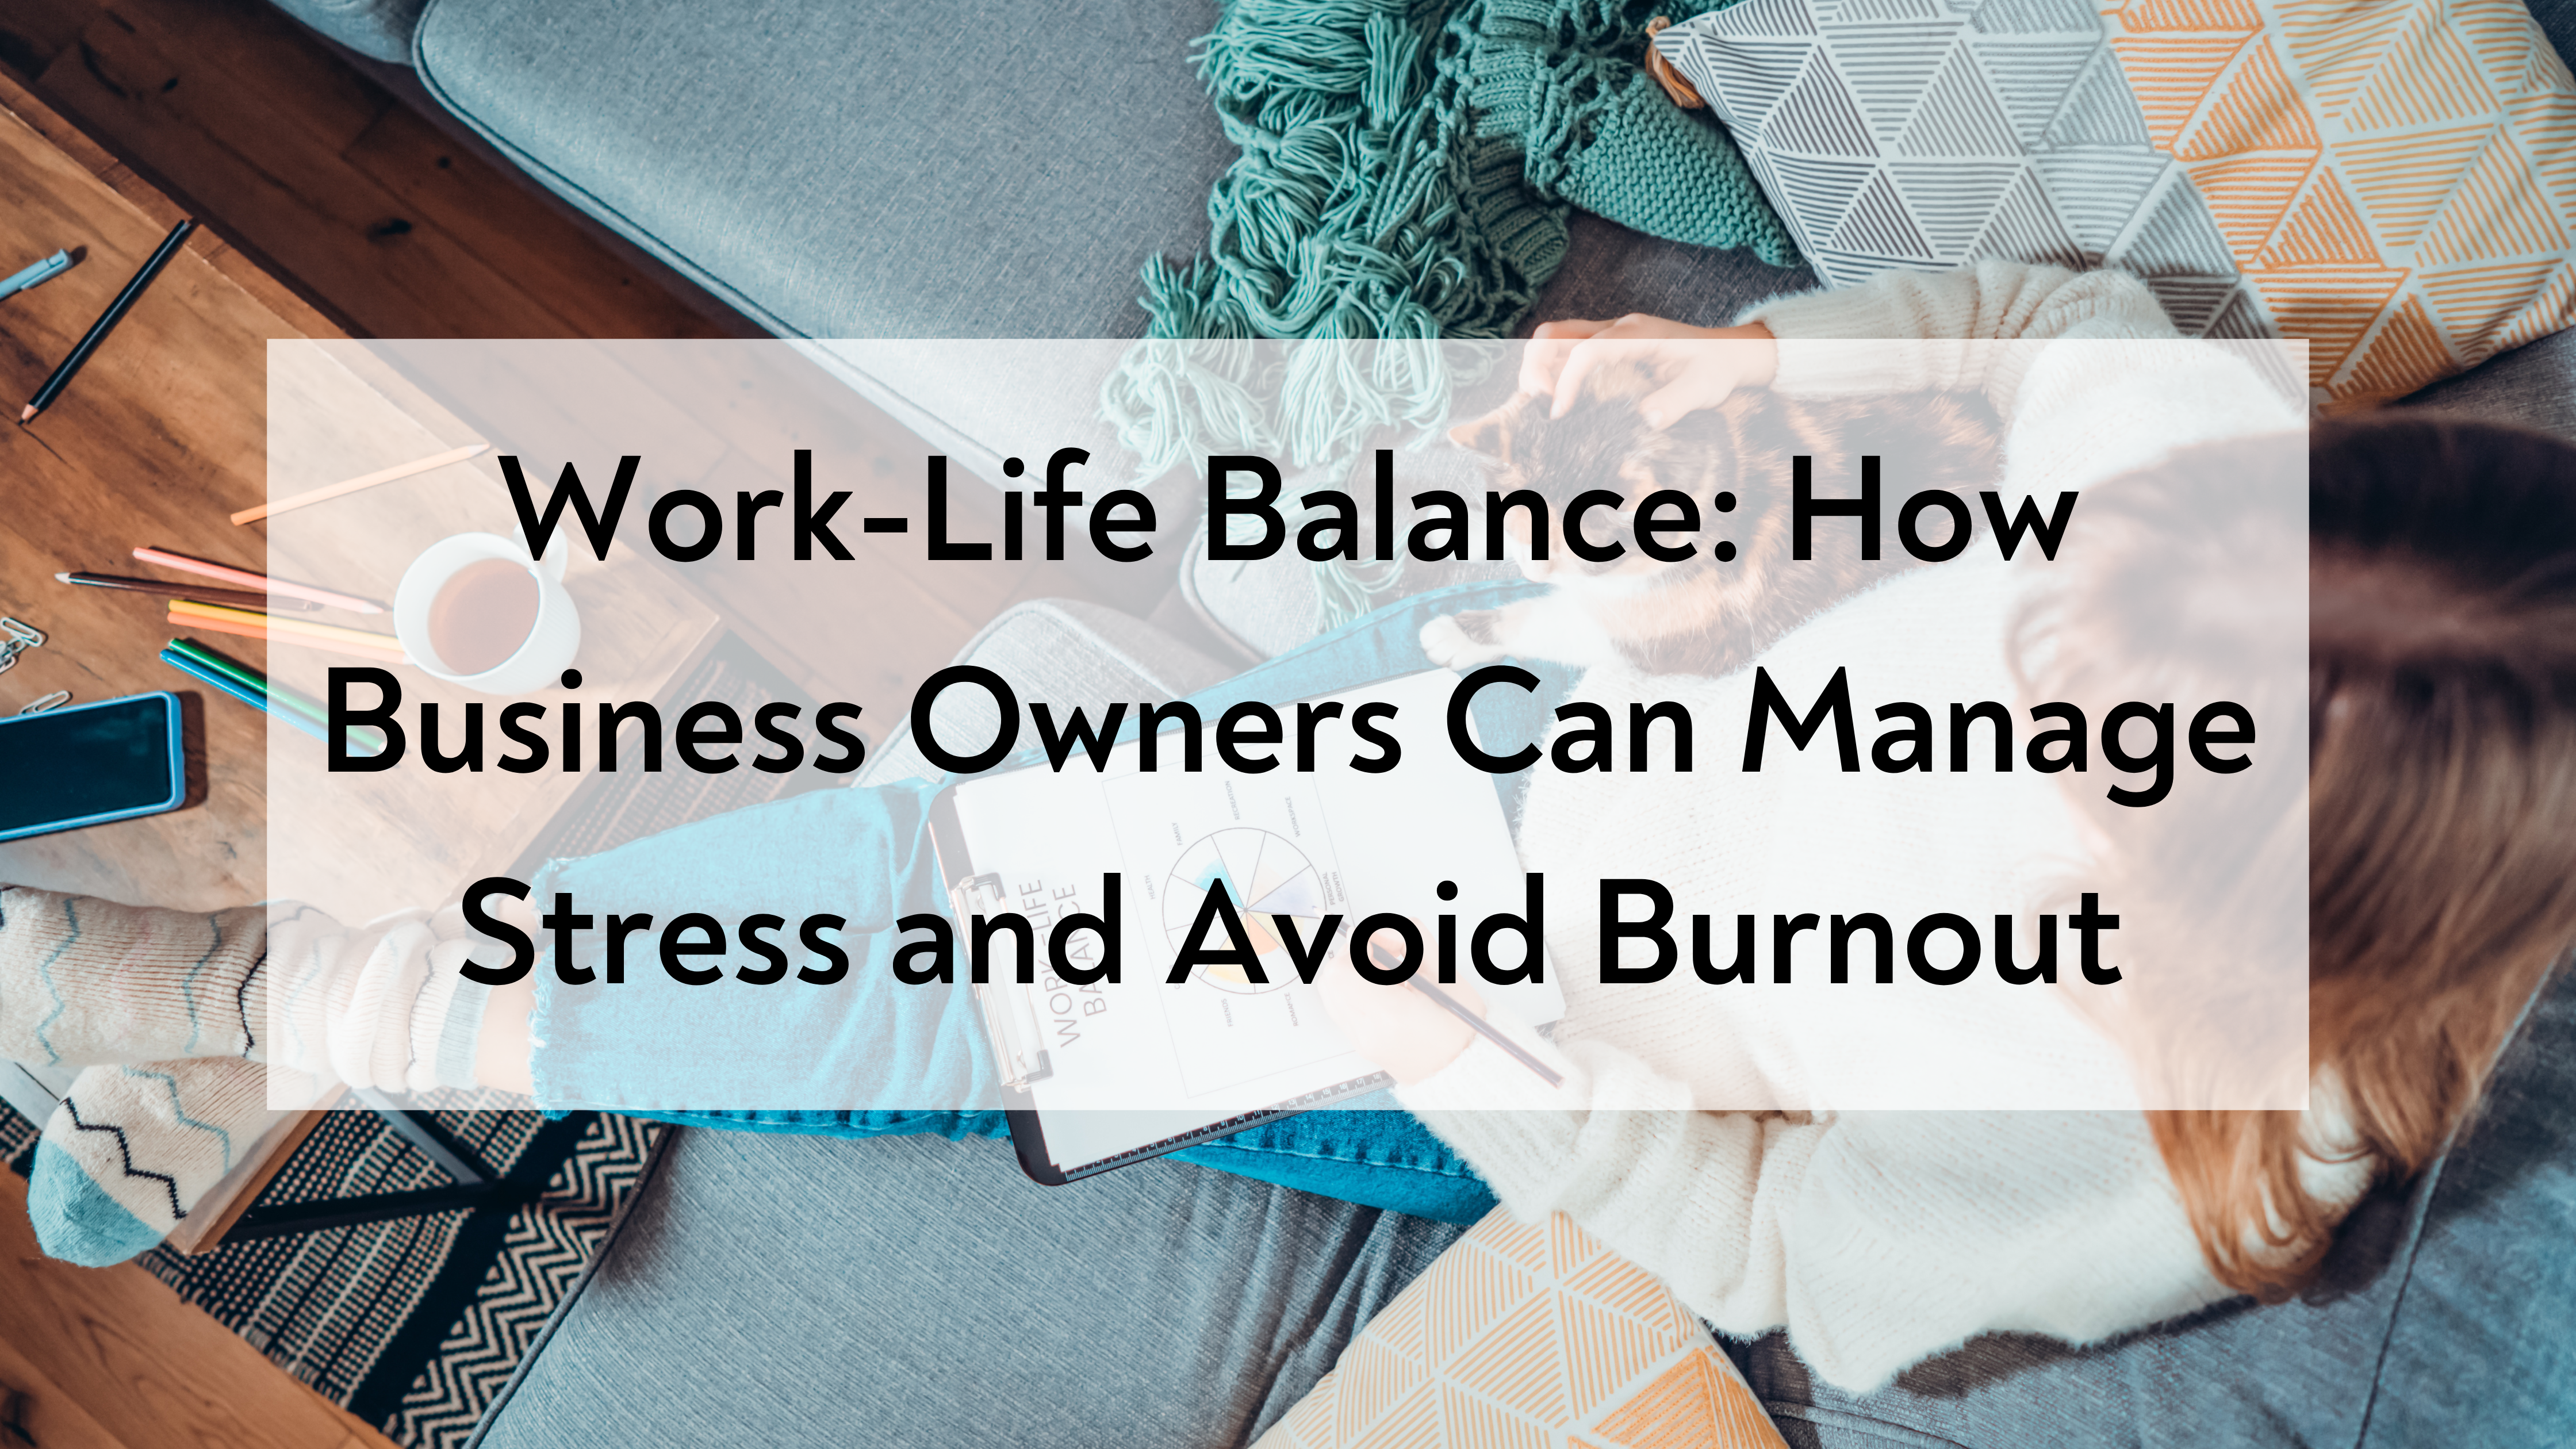 Work-Life Balance: How Business Owners Can Manage Stress and Avoid Burnout